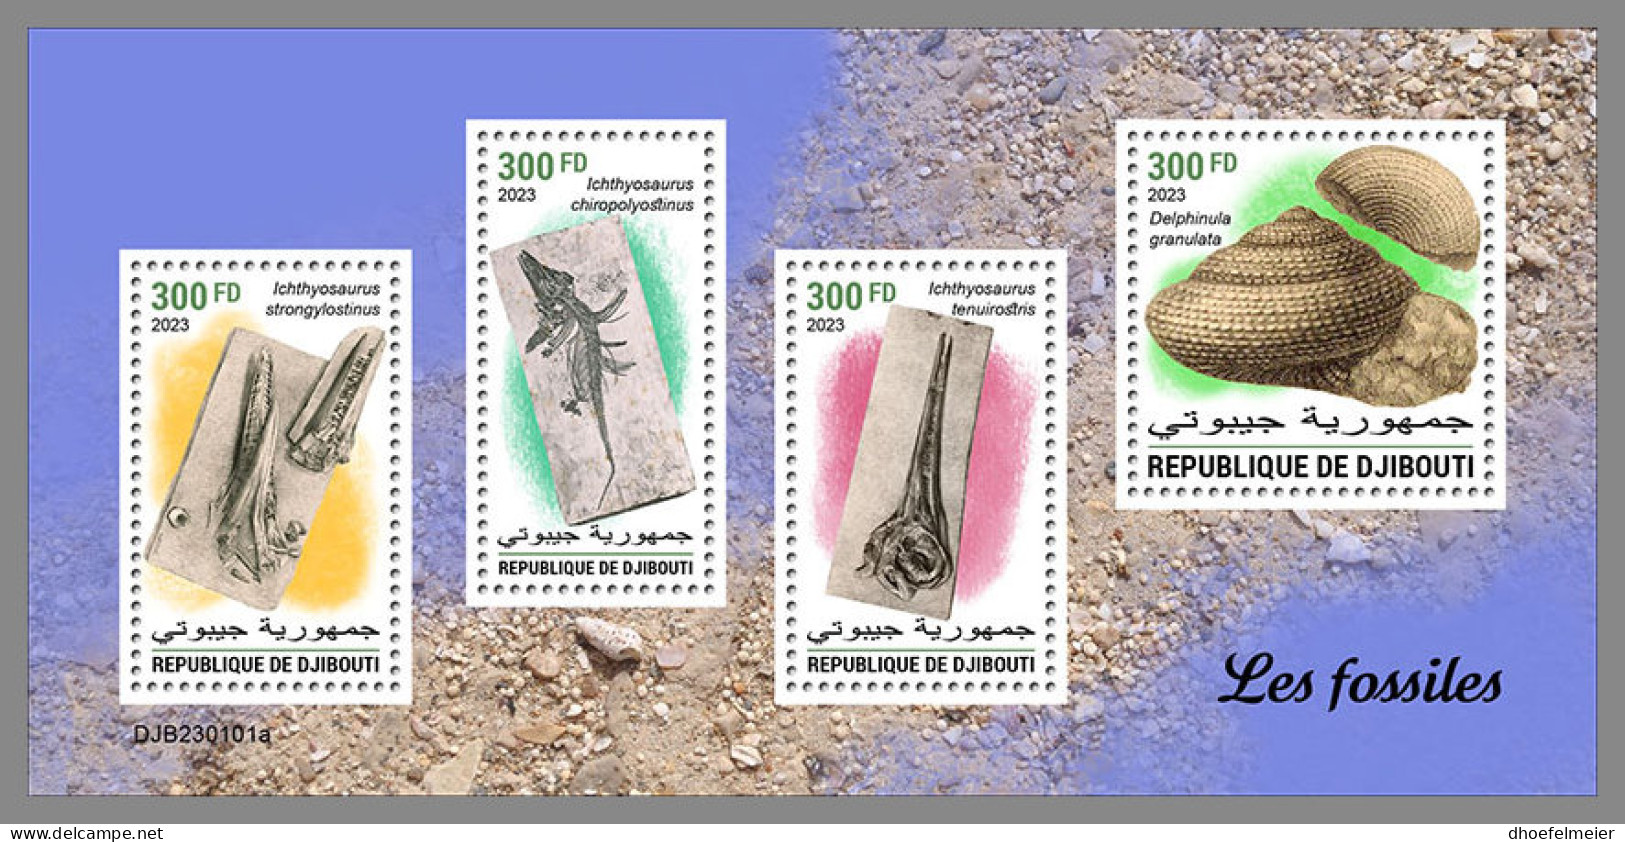 DJIBOUTI 2023 MNH Fossils Fossilien M/S - OFFICIAL ISSUE - DHQ2326 - Fossiles